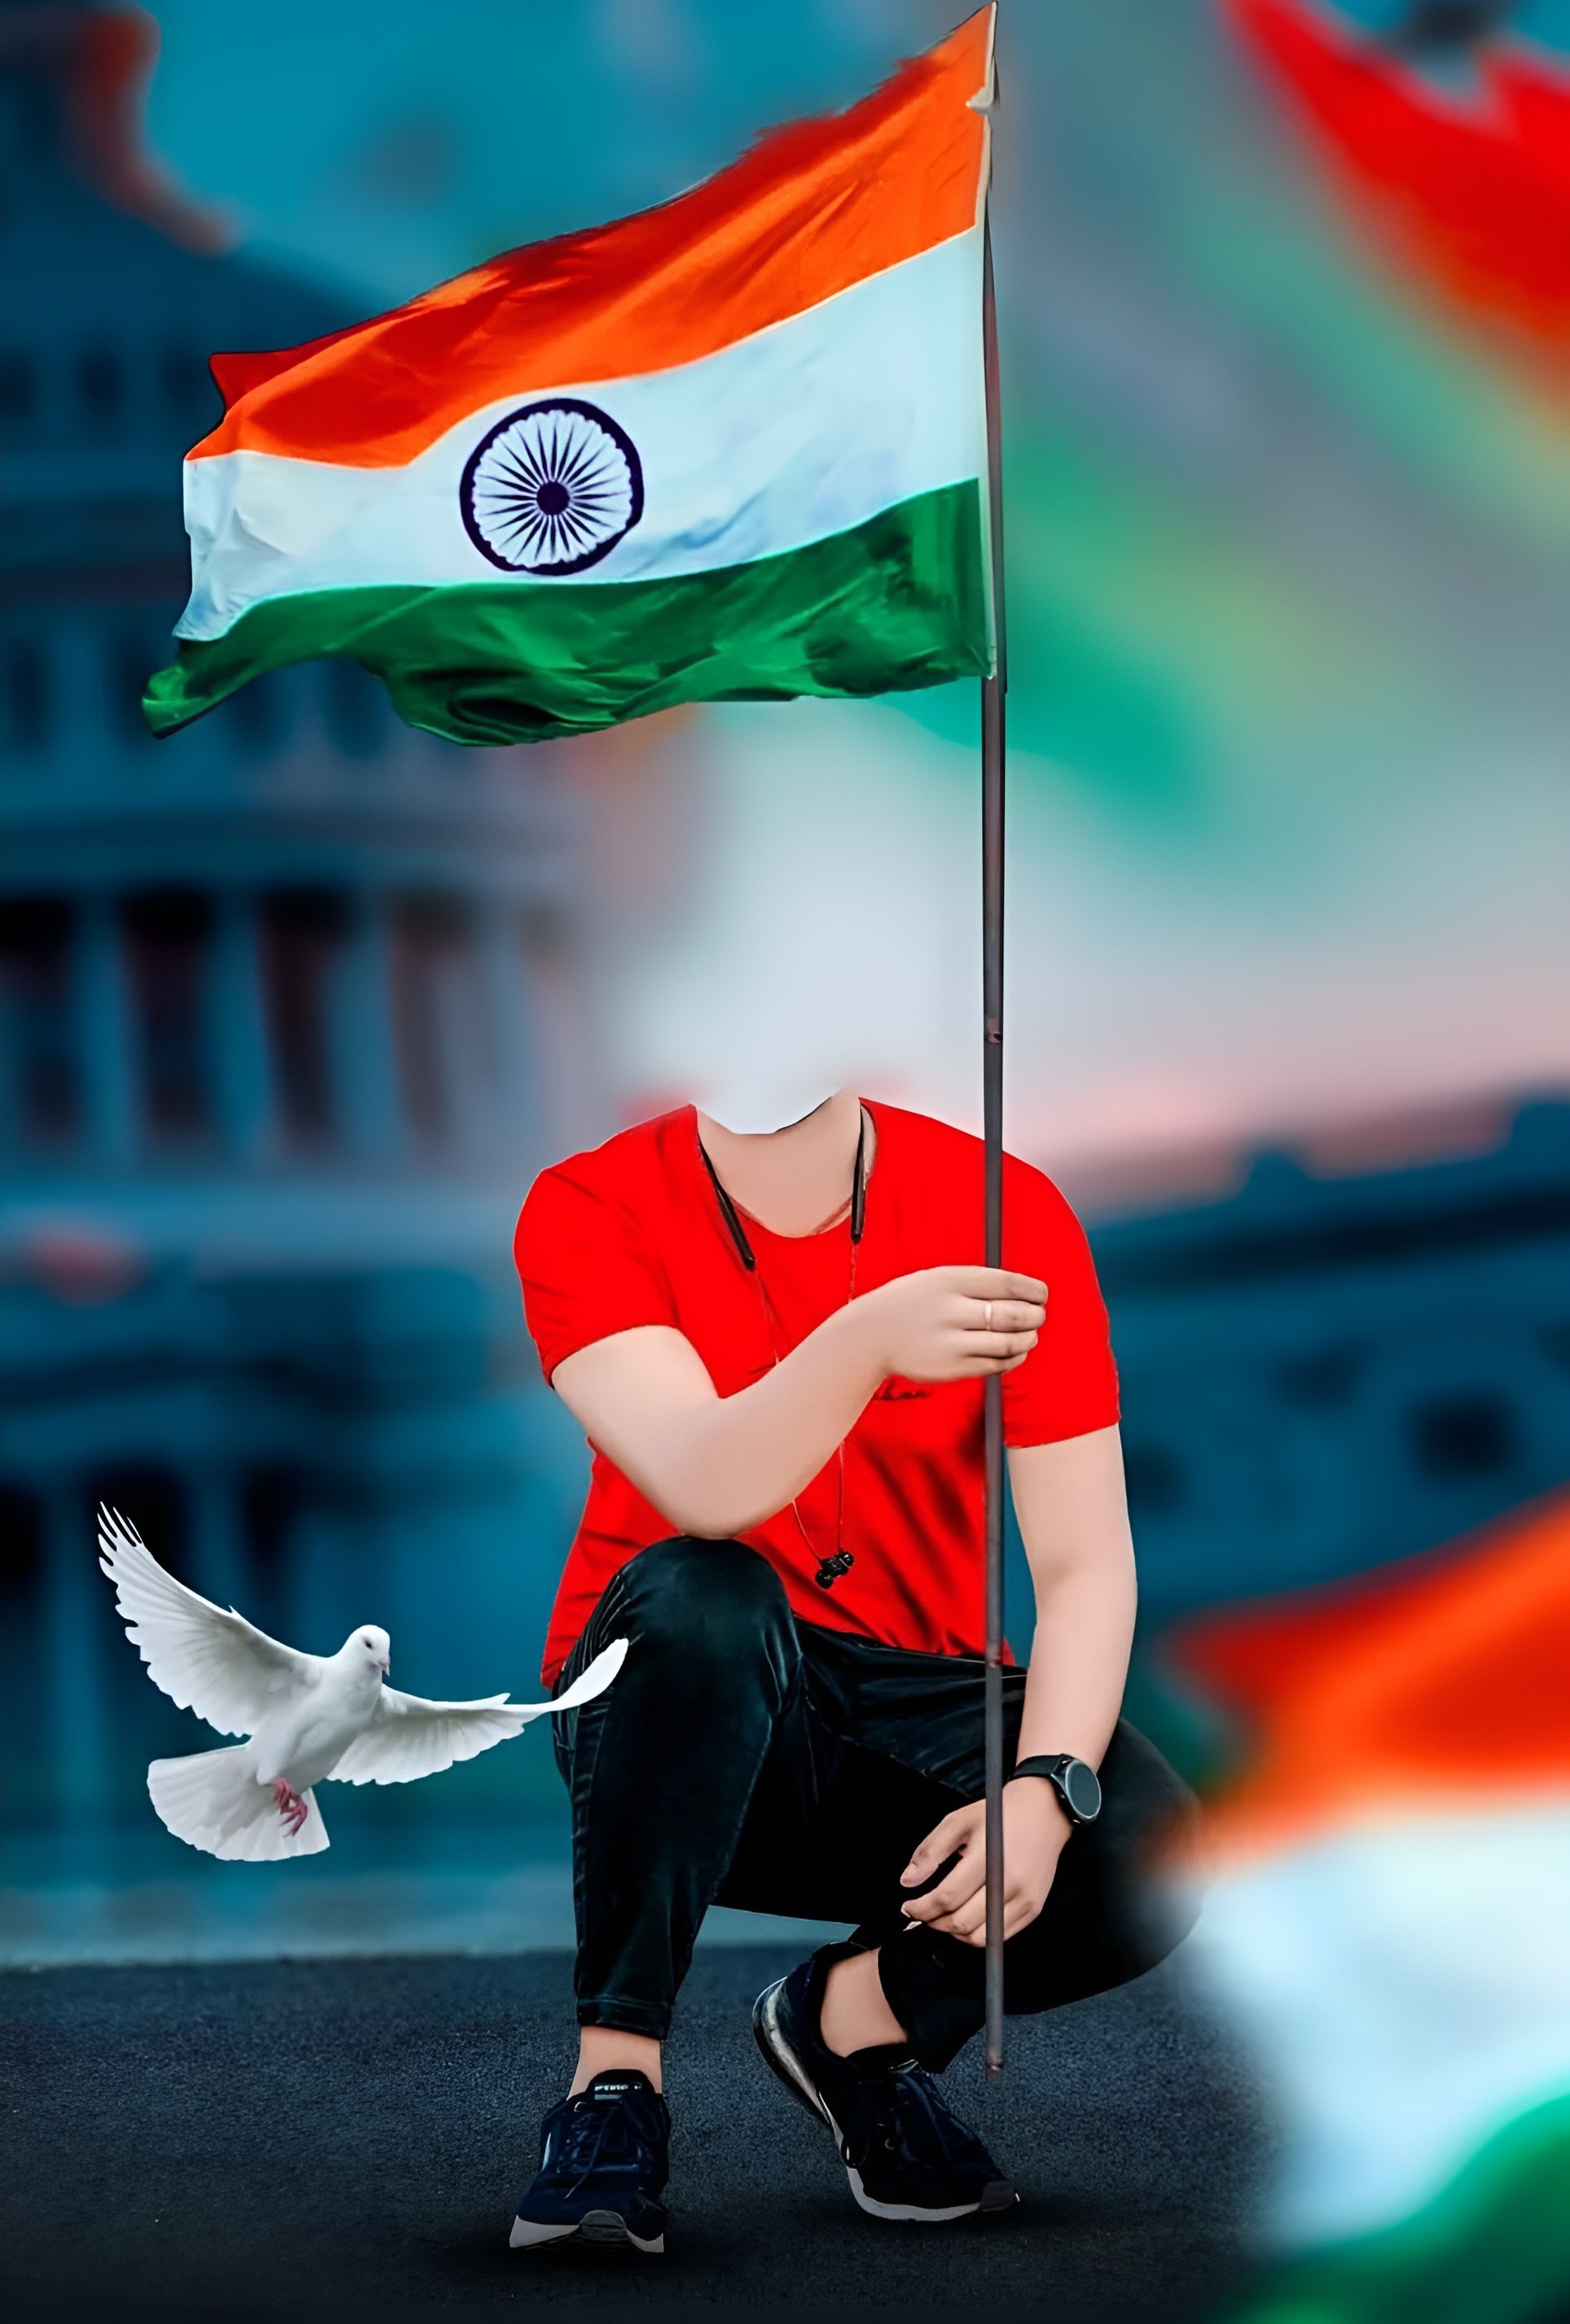 India 26 January Republic Day Without Face Editing Background